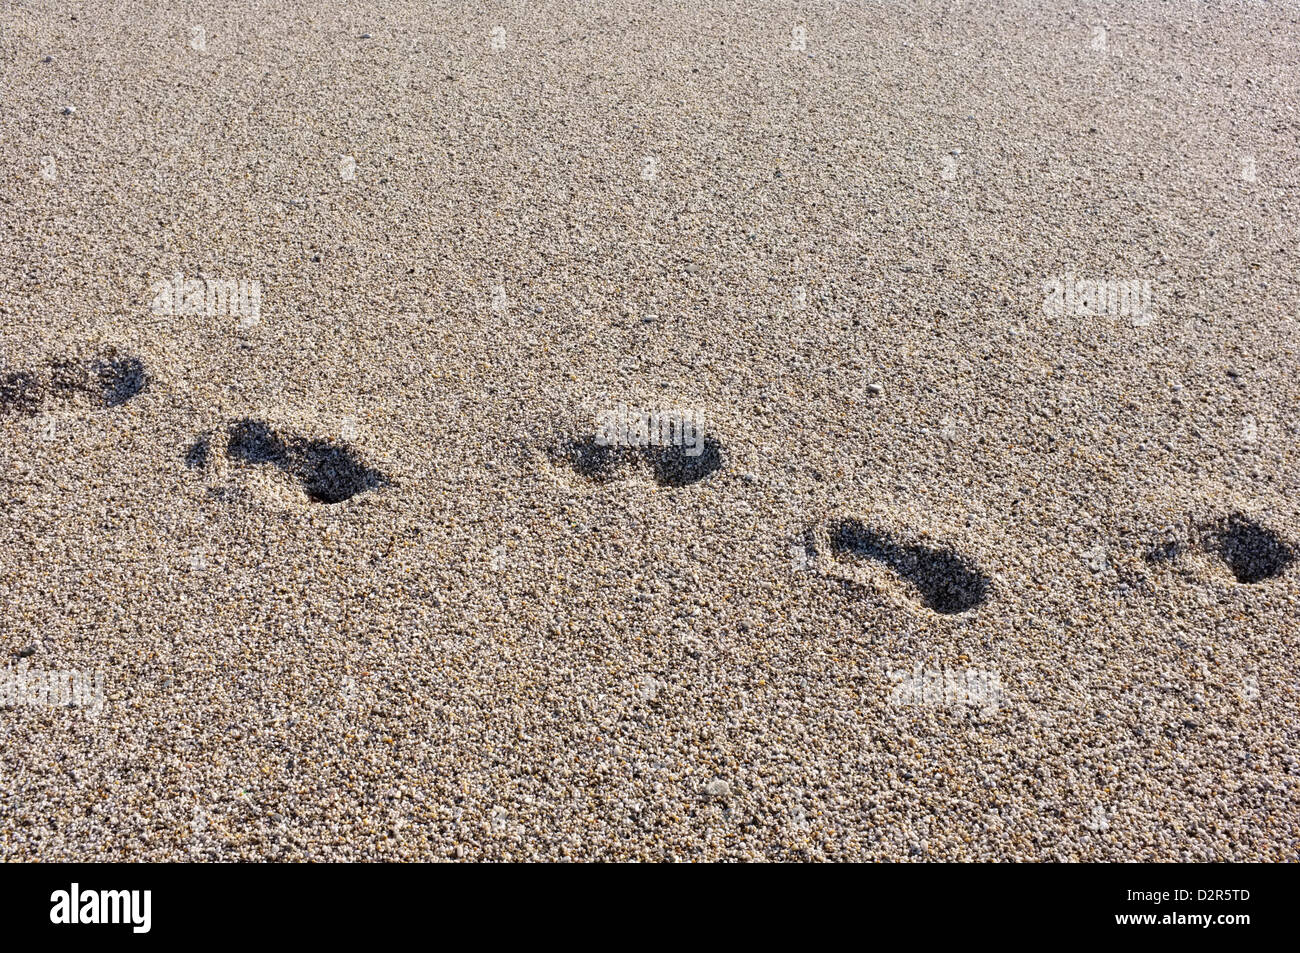 Footsteps in sand Stock Photo